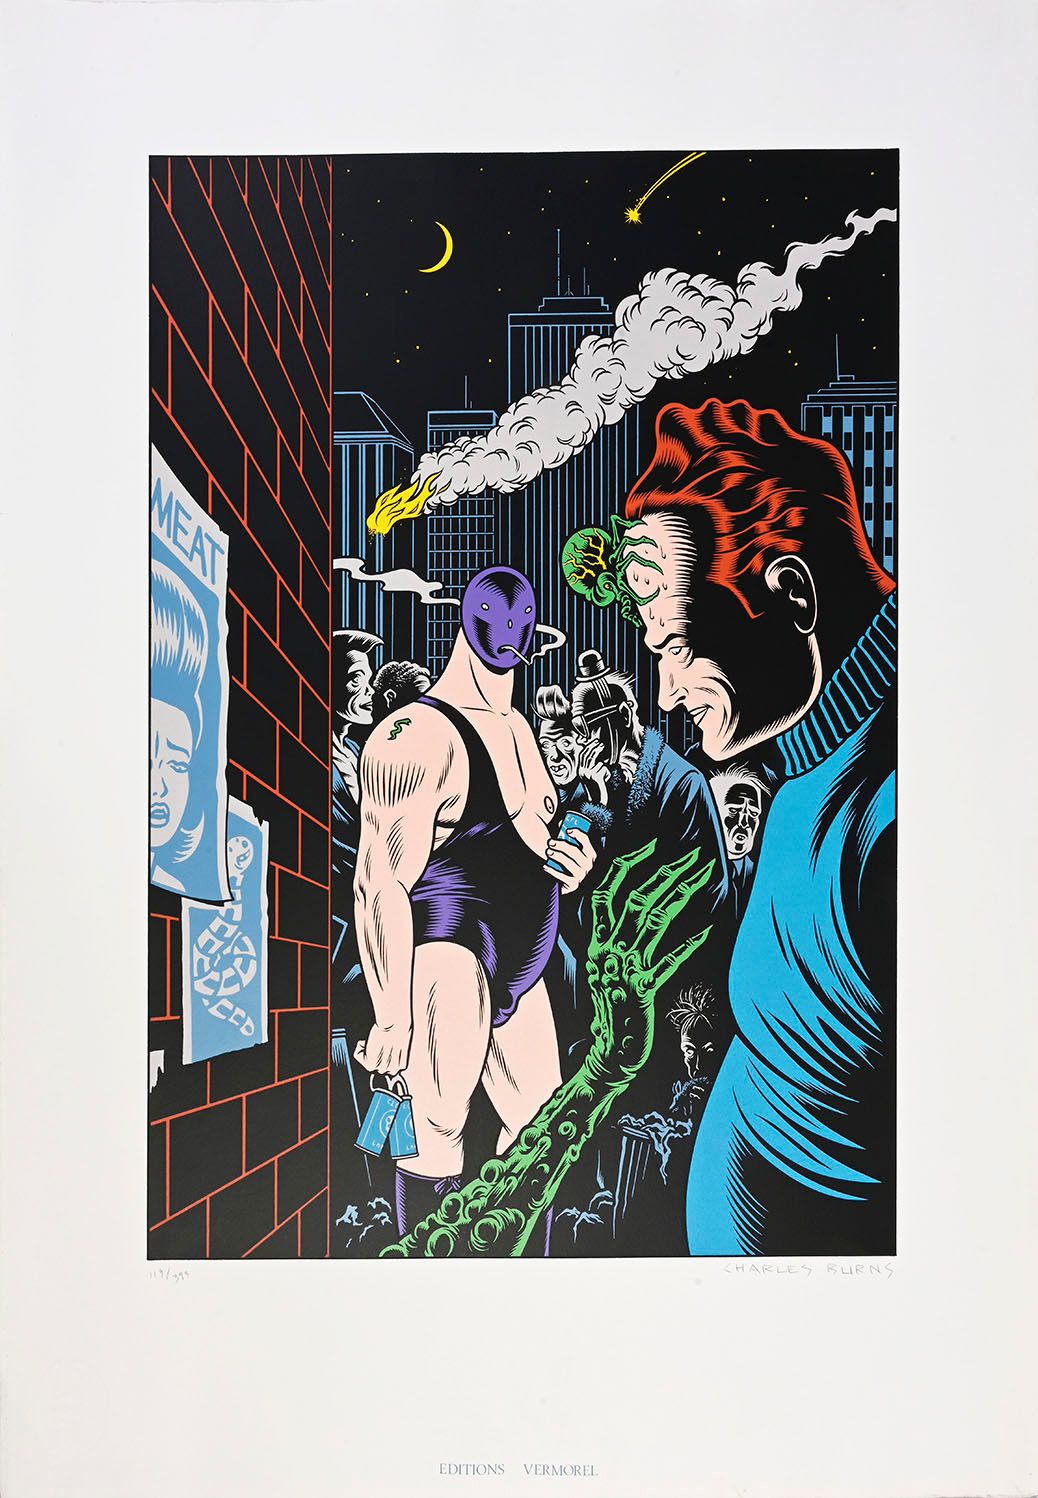 BURNS SERIGRAPHY.
Editions Vermorel, signed and numbered 119/399. 56,5x76,5 cm